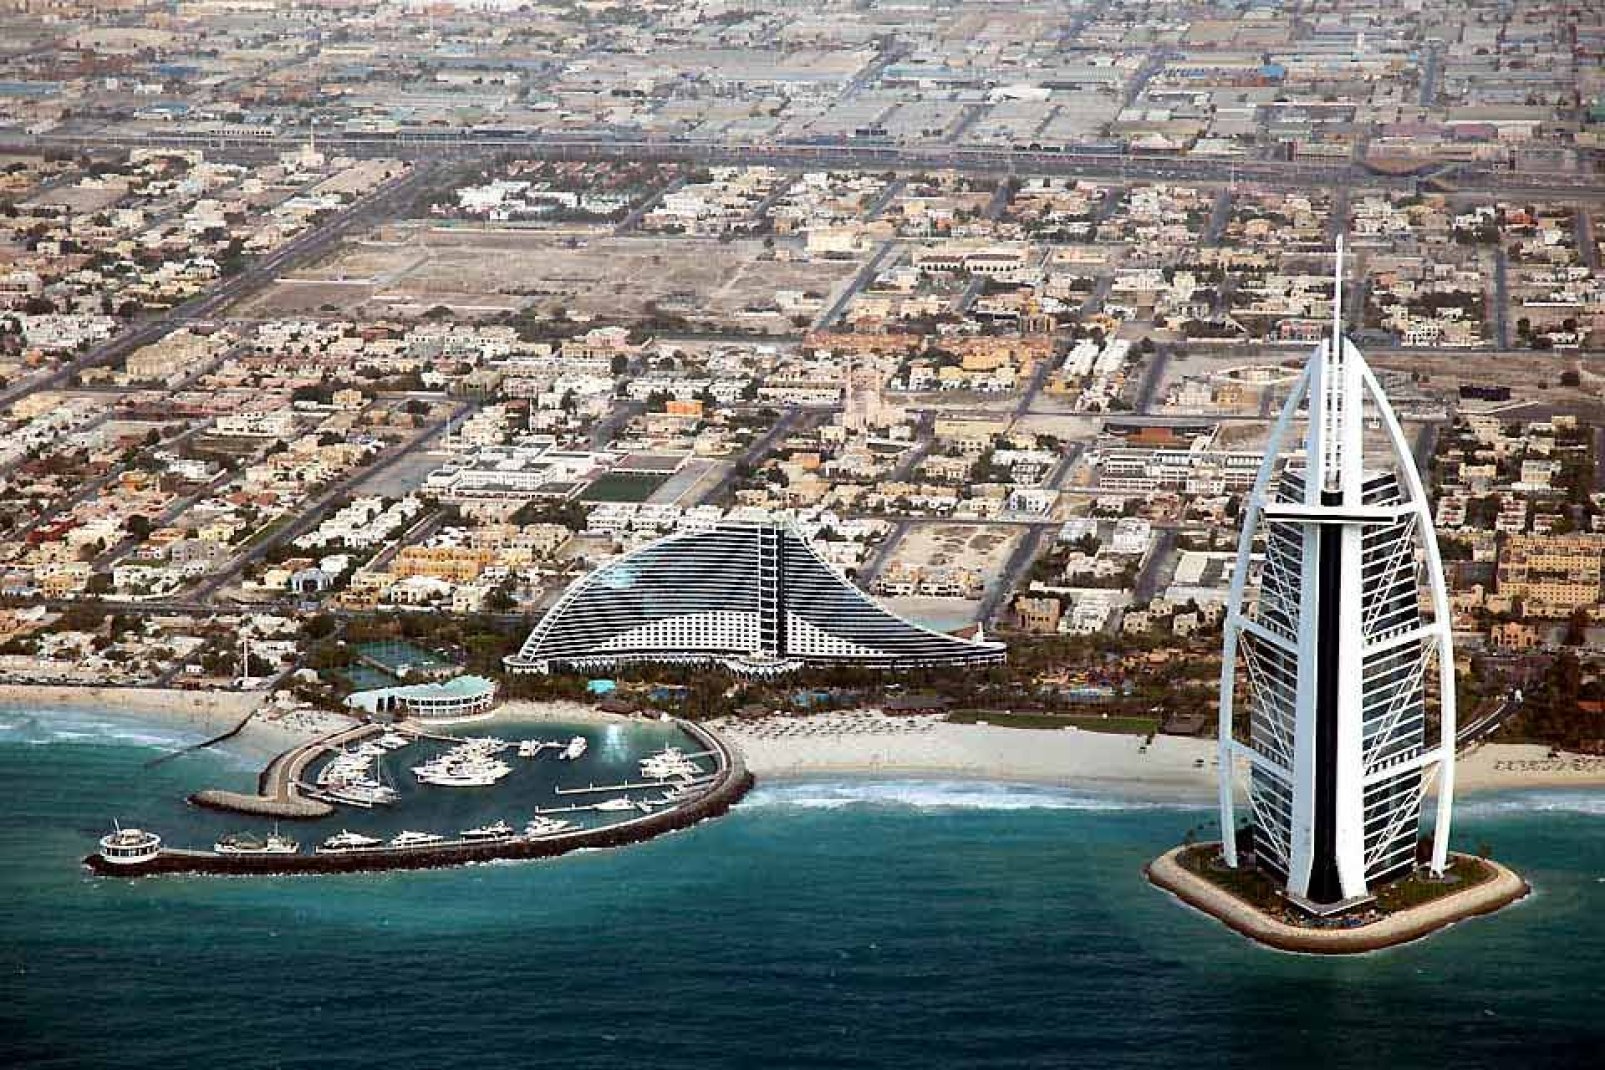 Dubai is famous for its hotels and its imaginative structures, including the Burj al Arab Hotel.